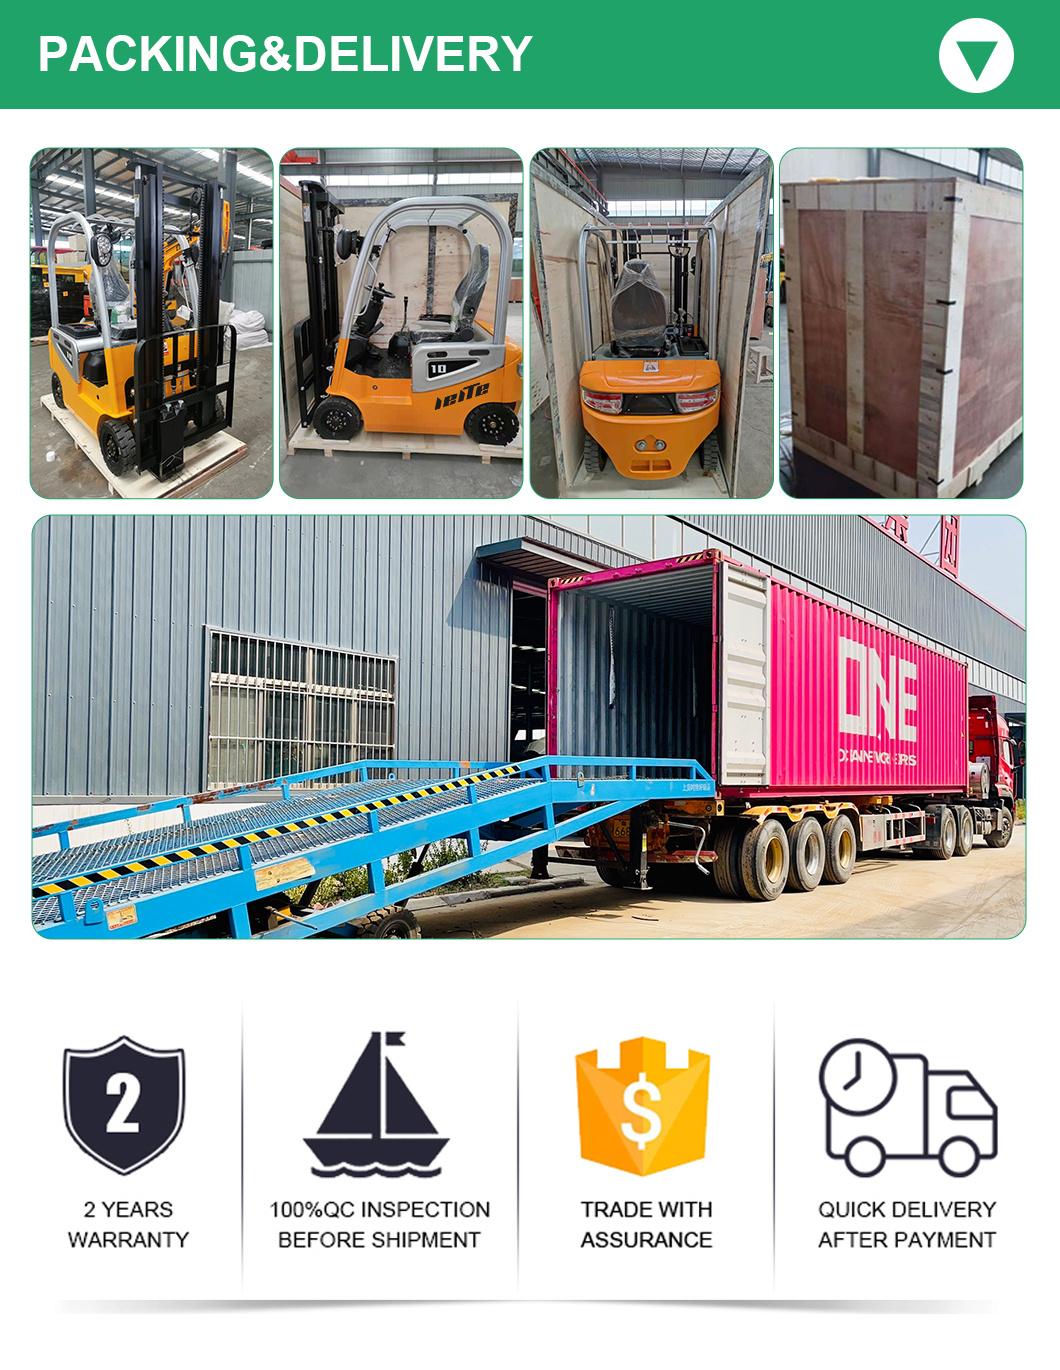 Professional Design 1800 Kg Forklift Cheap Price Mini Electric Forklifts